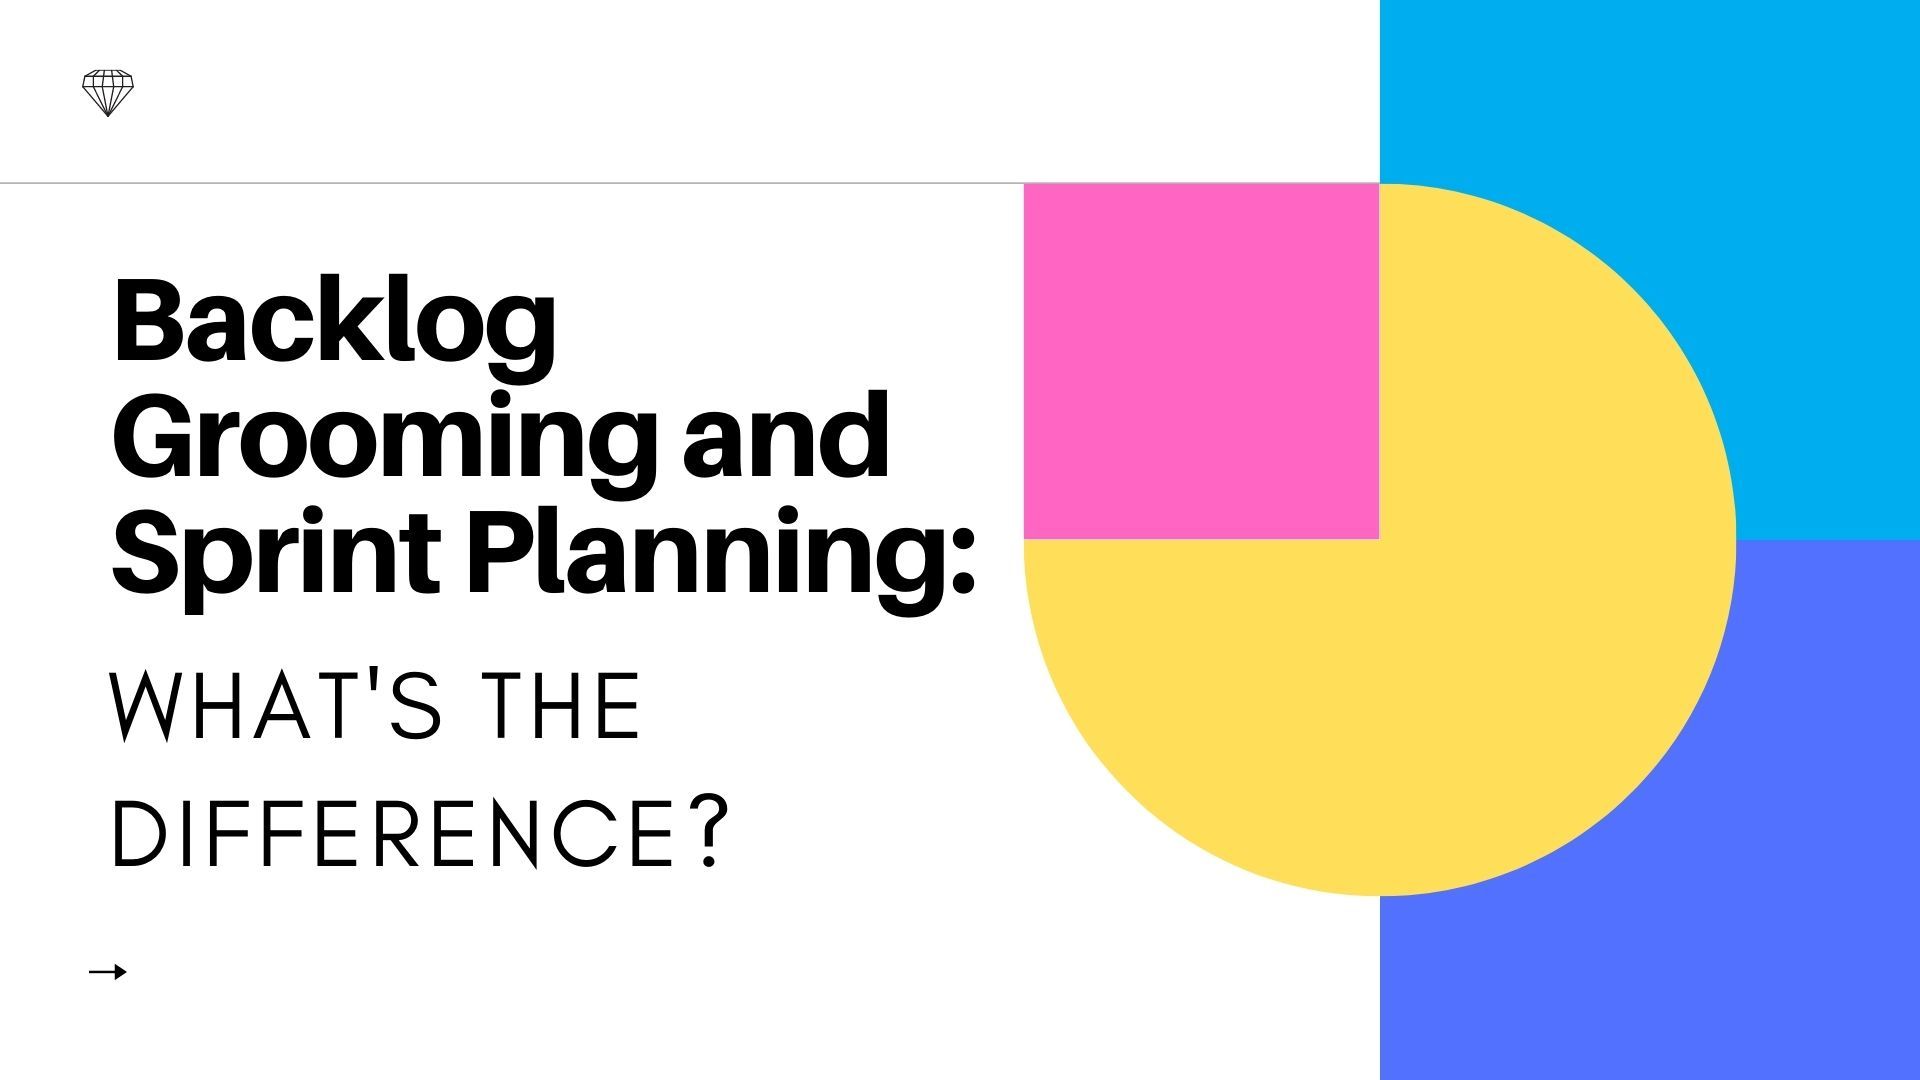 Backlog Grooming and Sprint Planning: What's the Difference?